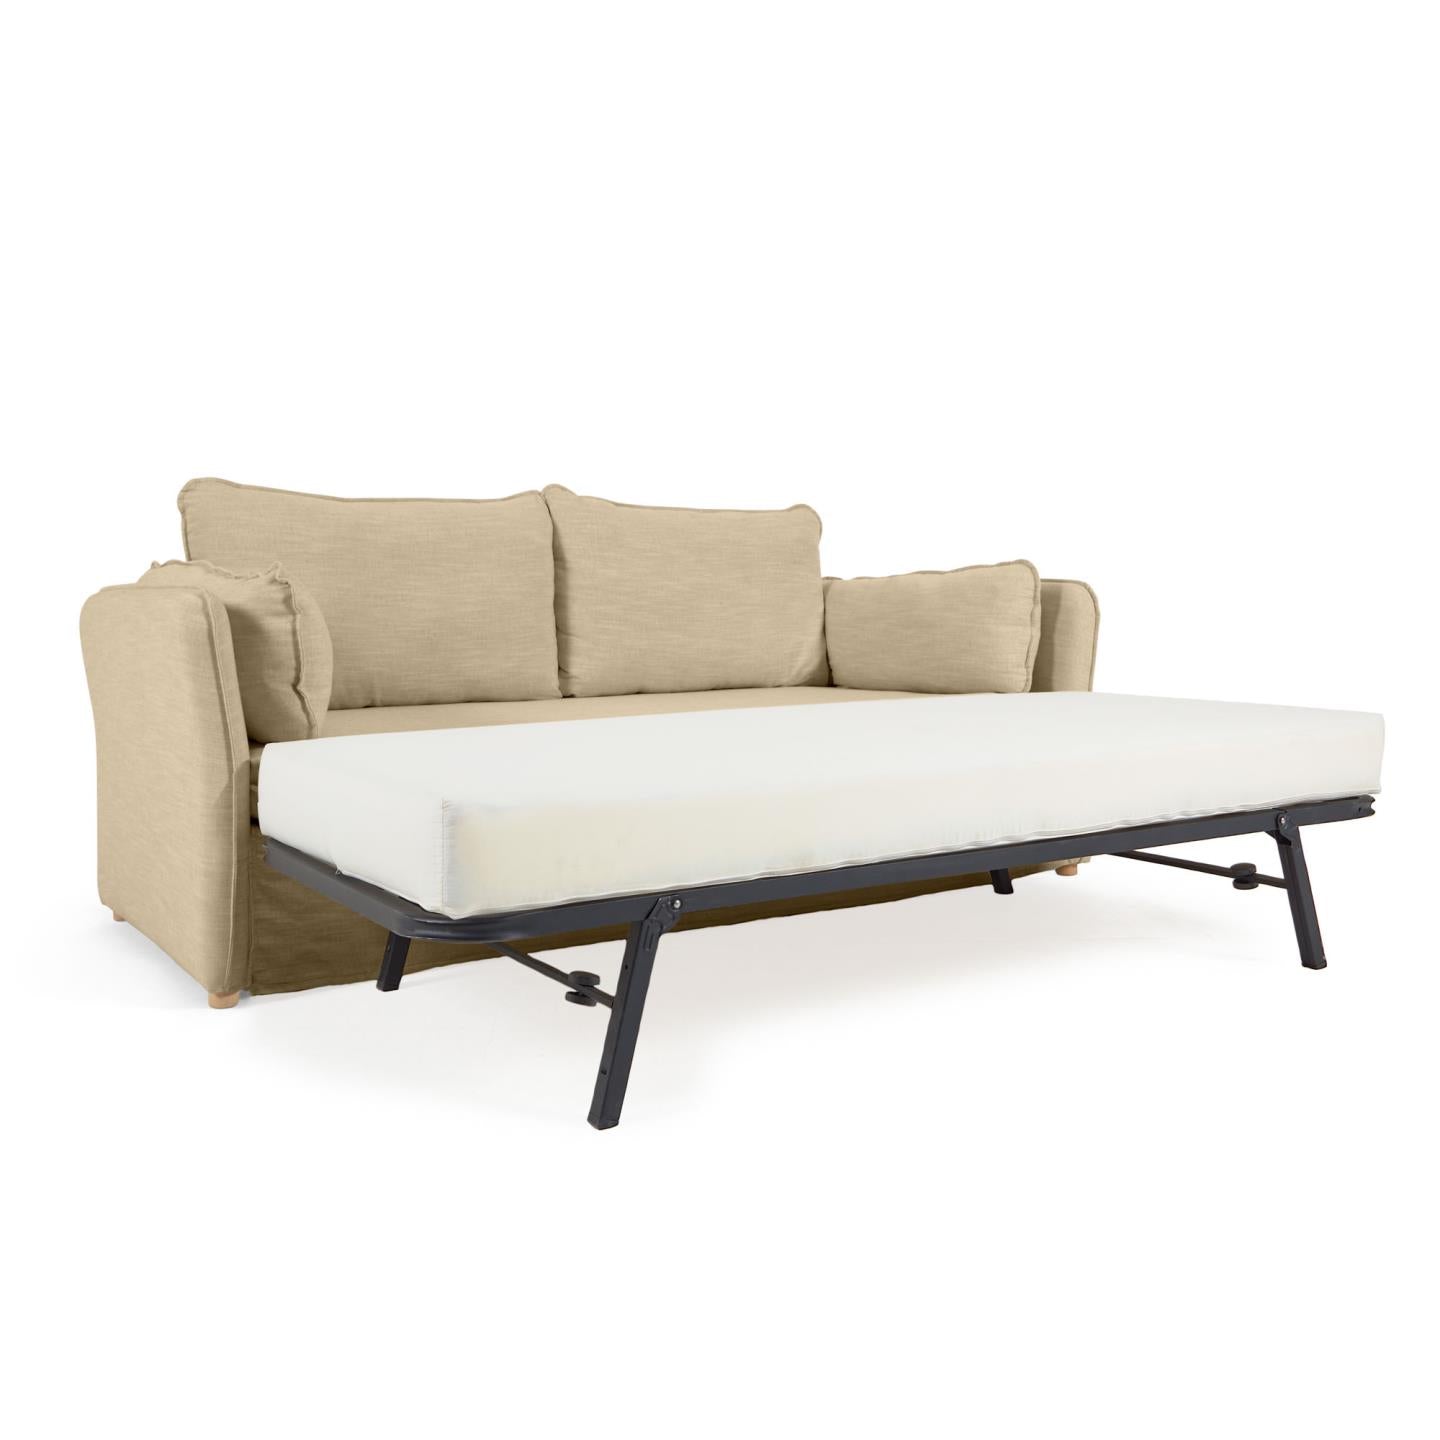 Tanit sofa bed in beige with natural finish solid beech wood legs, 210 cm